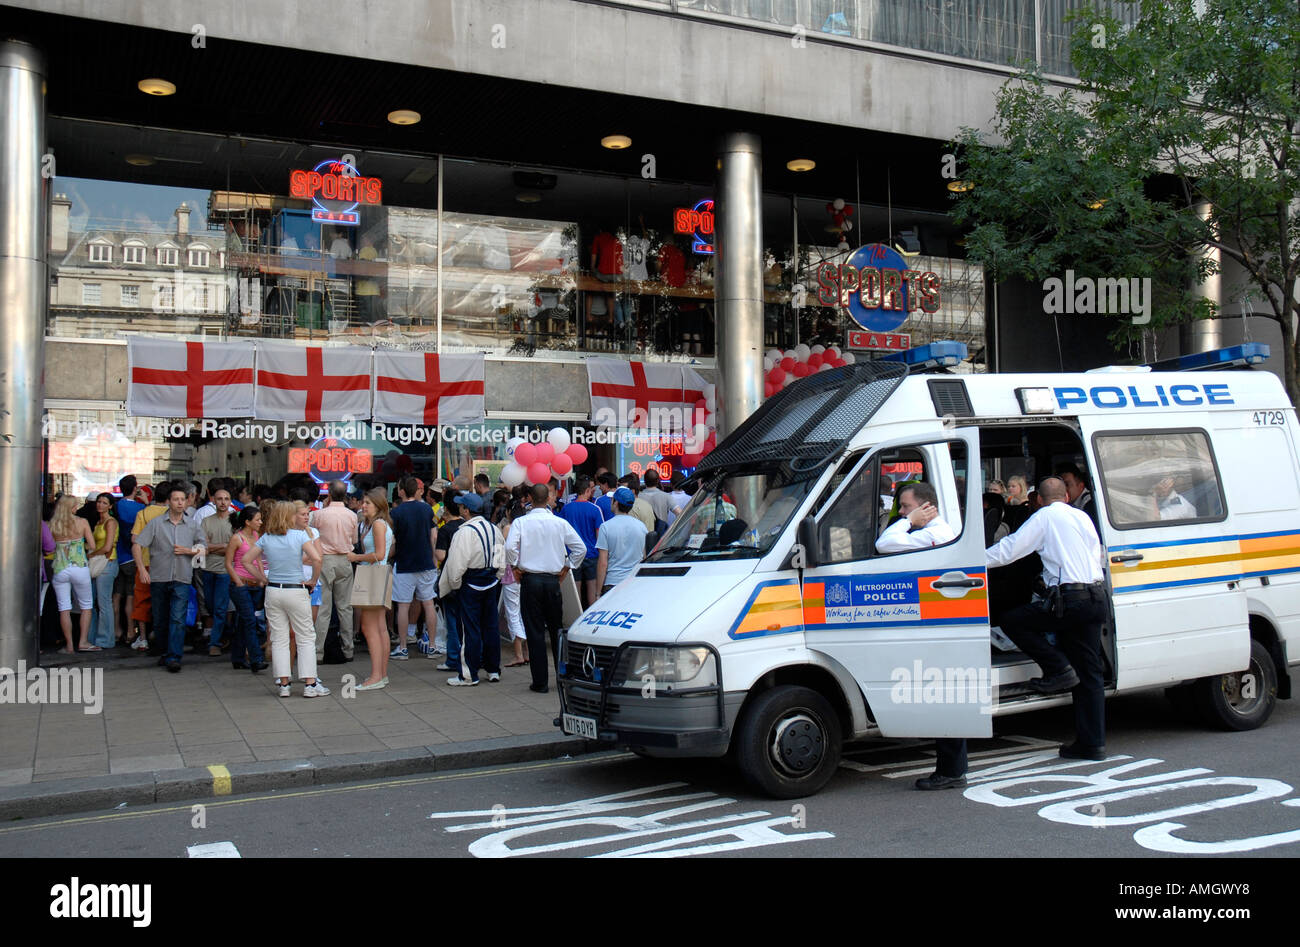 Police watching people watching a 2006 World Cup football match outside The Sports Café in Haymarket London Stock Photo